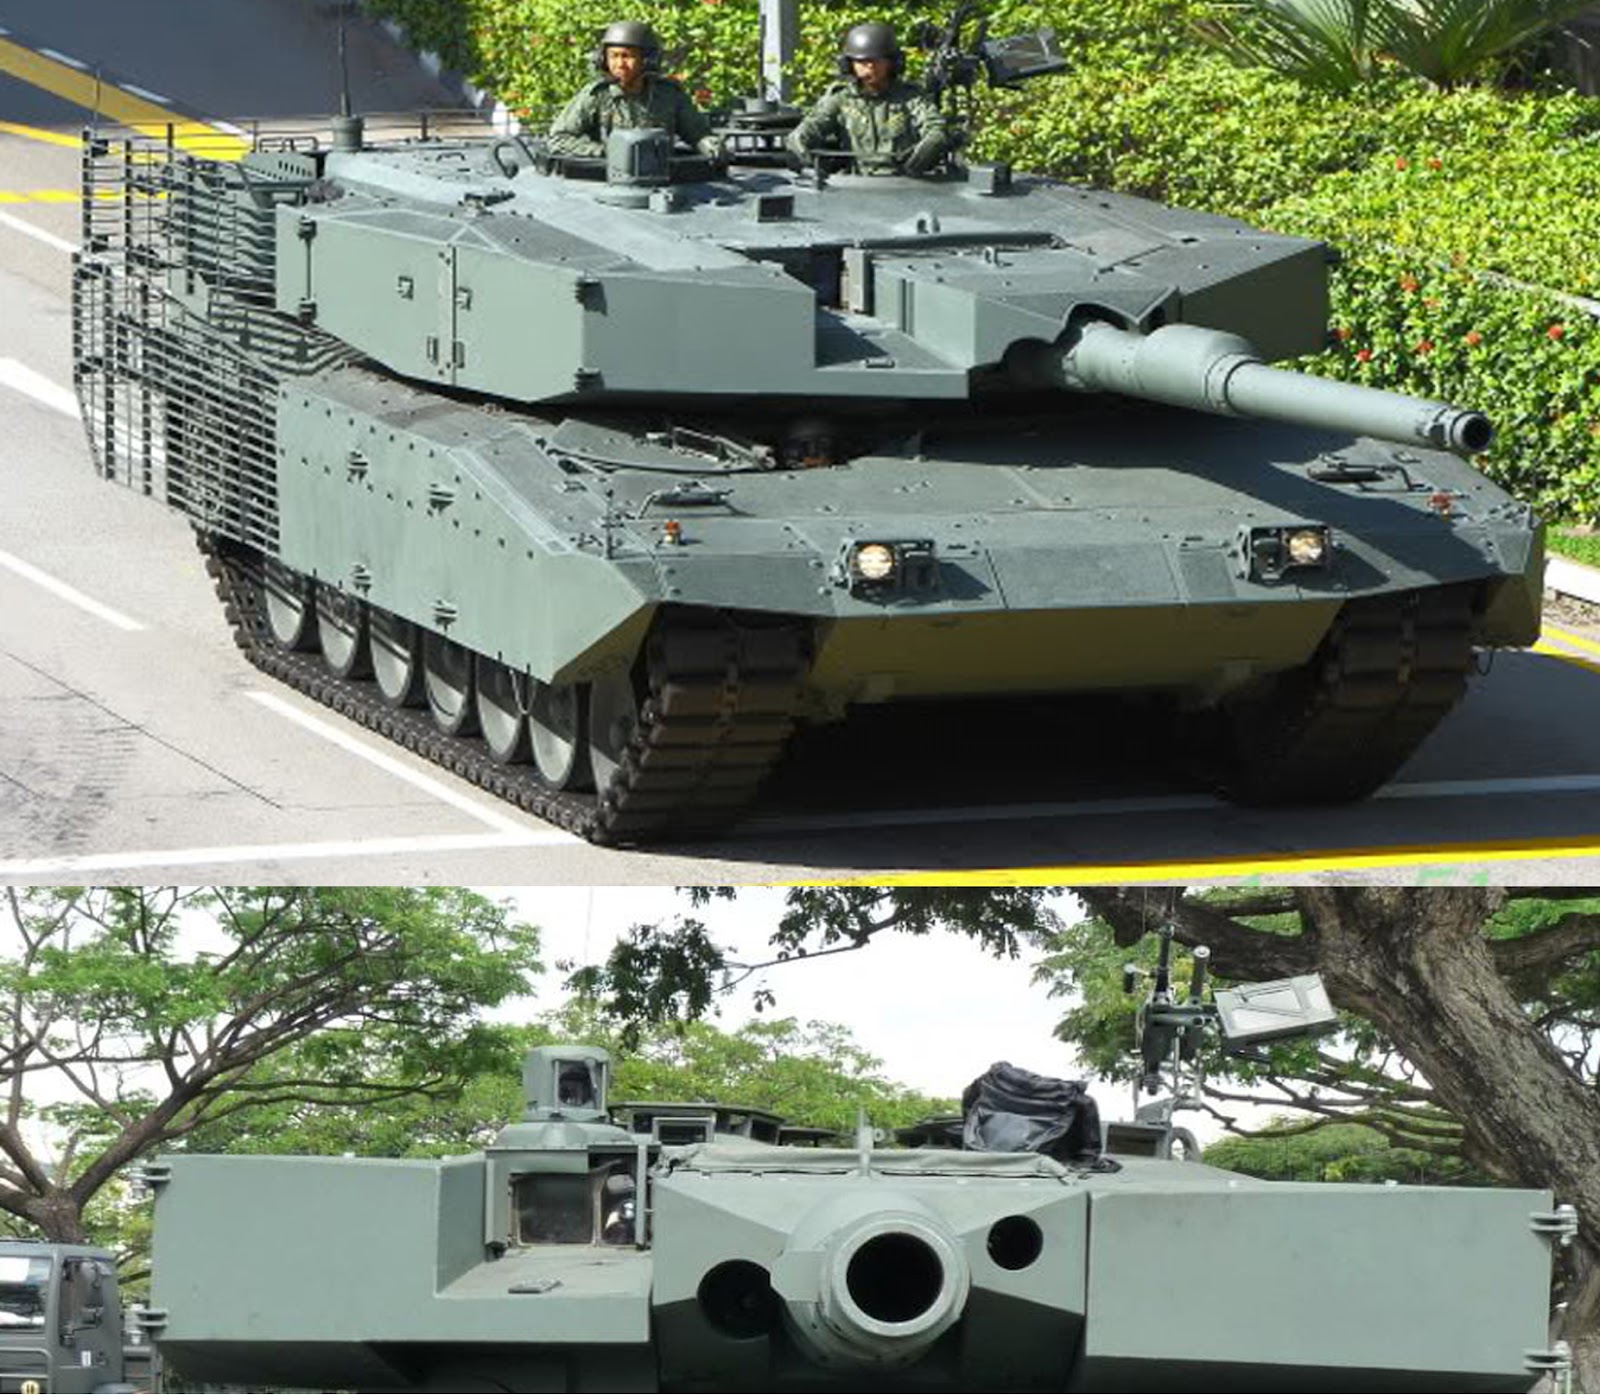 Singapore+Army's+Upgraded+Leopard-2A4+MBT.jpg